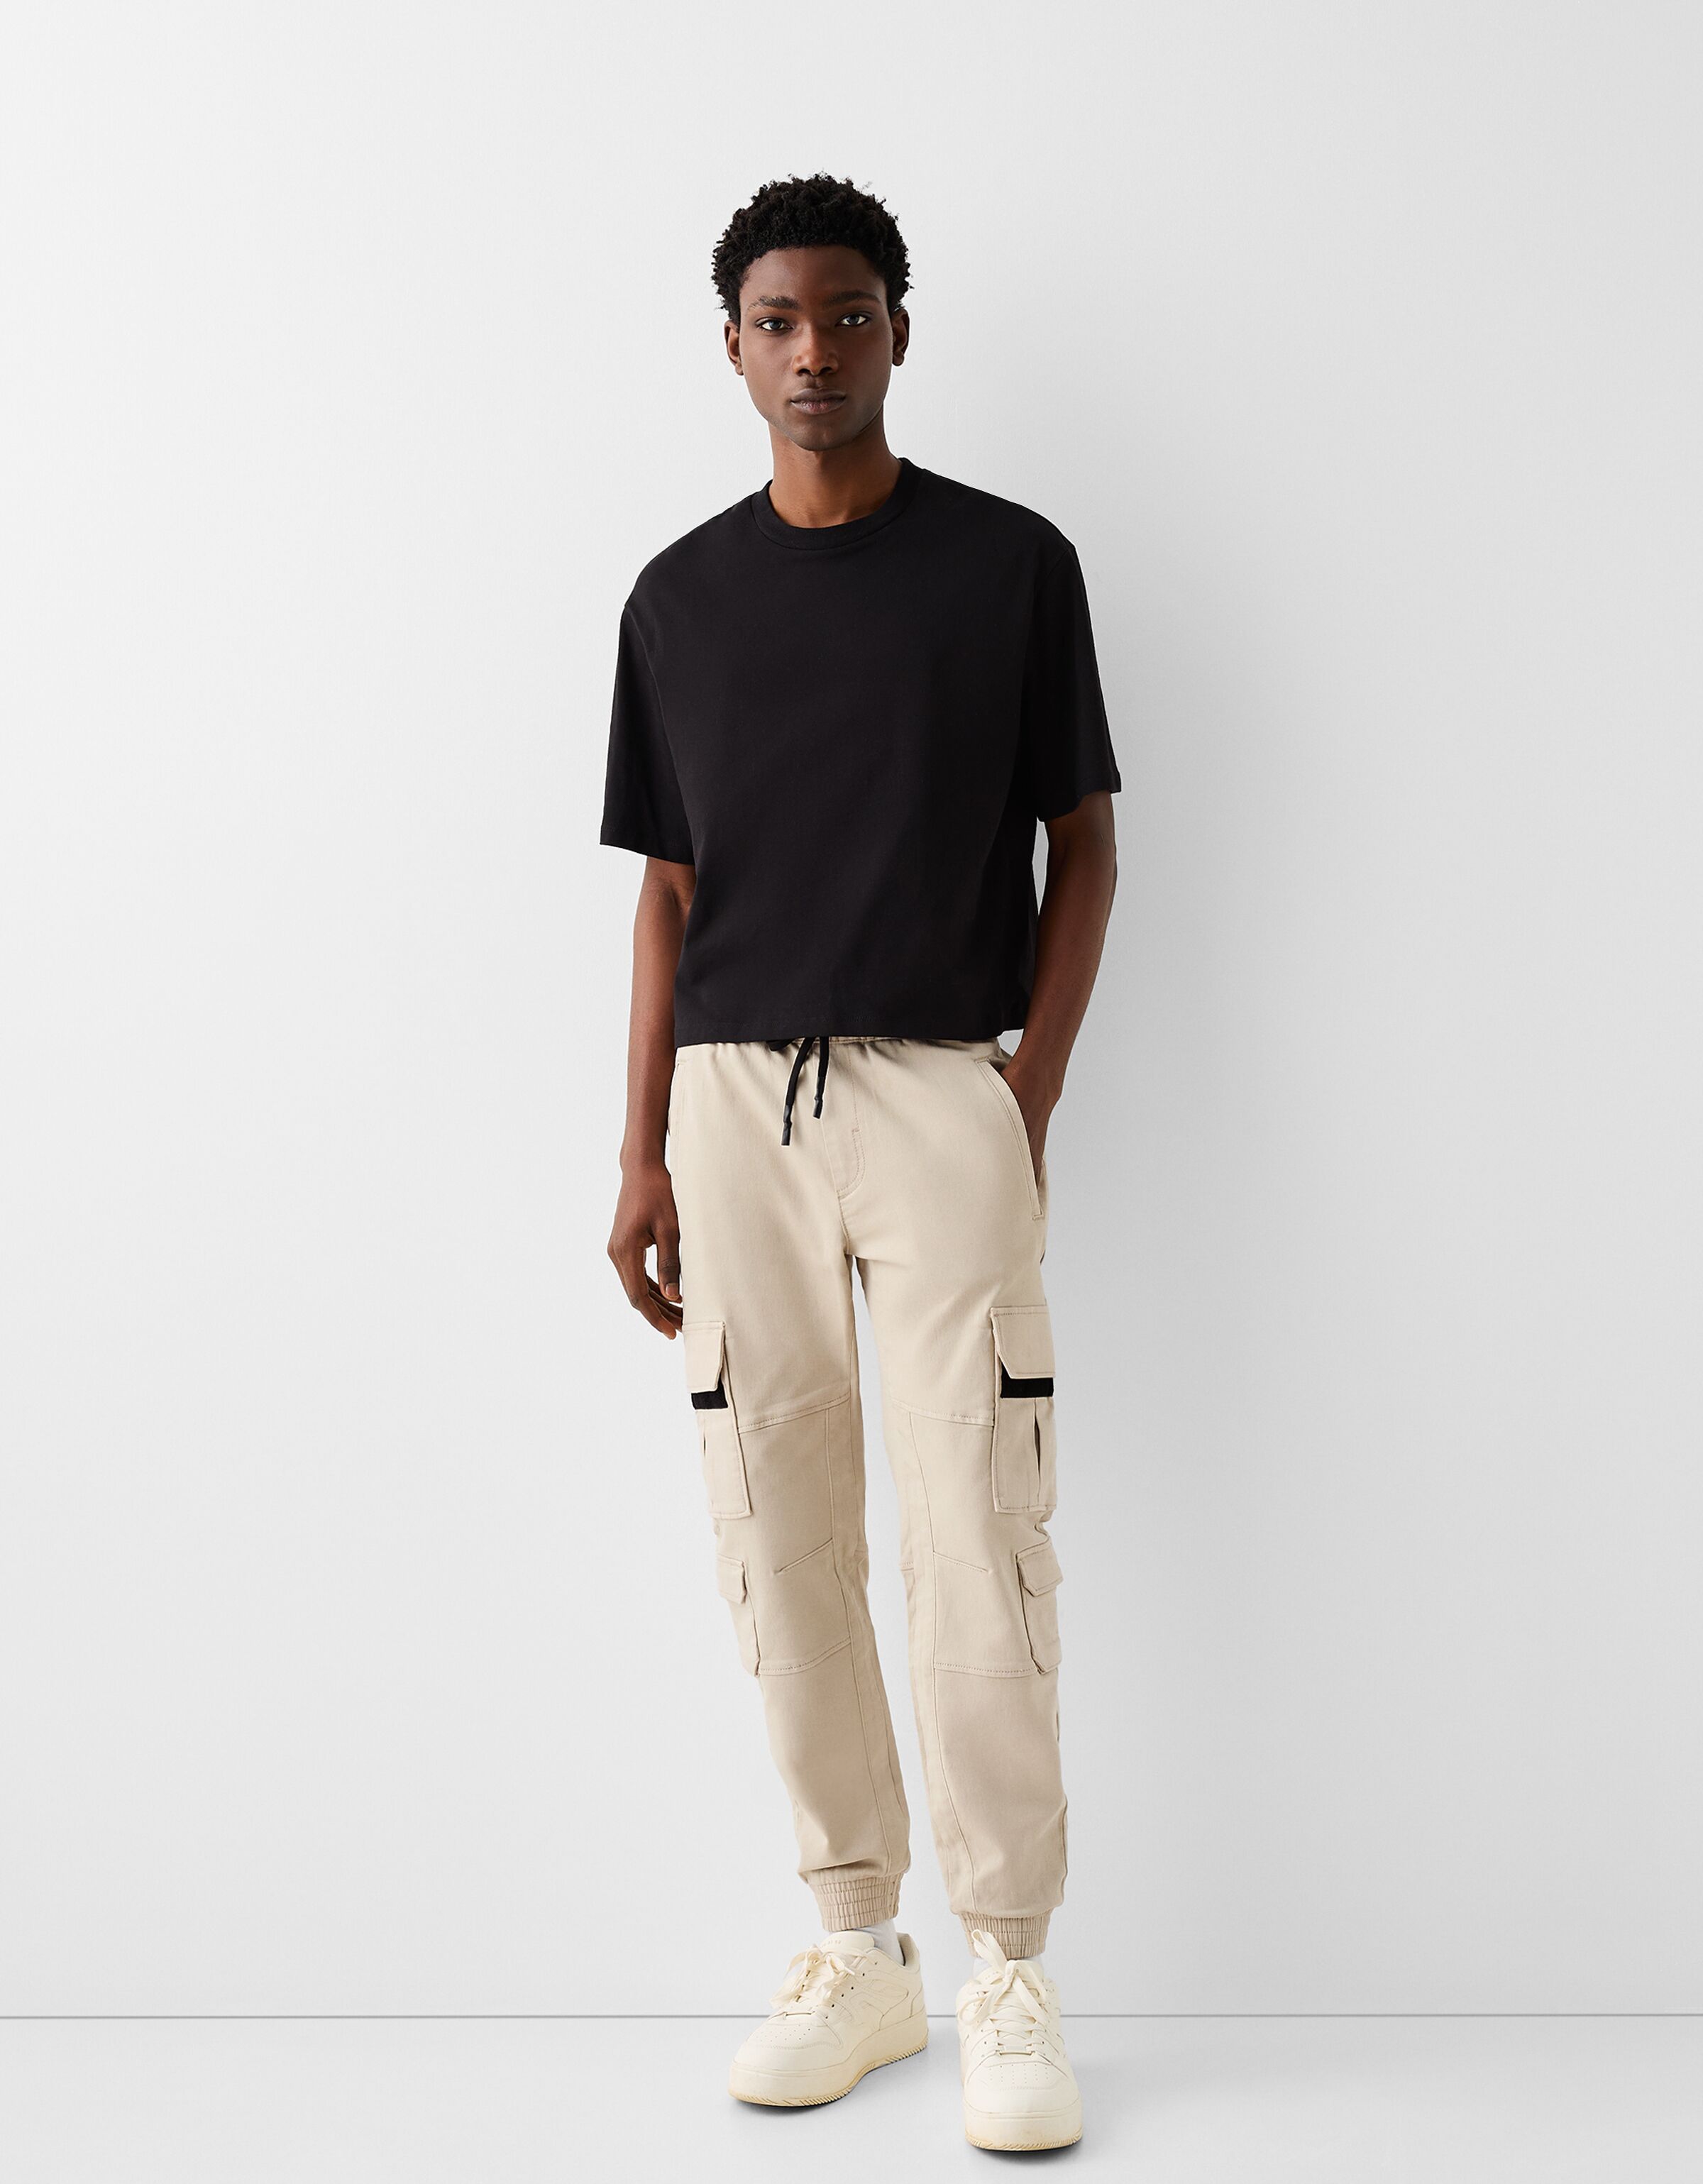 8 Cool And Casual Ways To Wear Cargo Pants